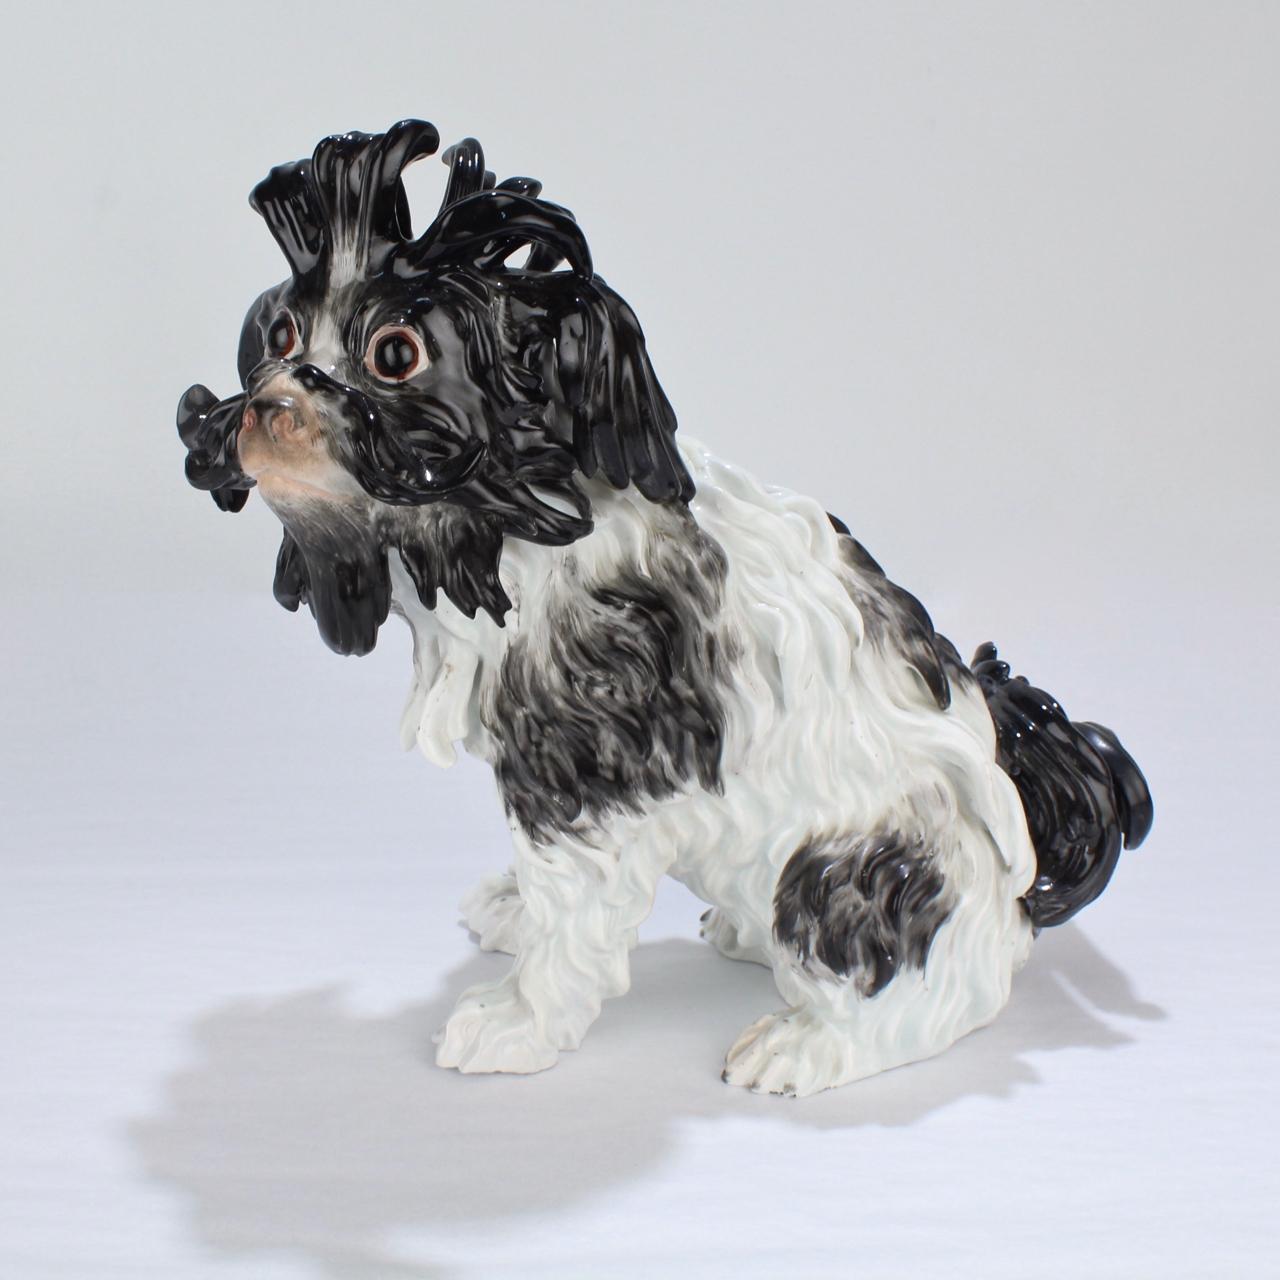 A good, antique Meissen porcelain figurine of a Bolognese dog. 

The Bolognese is a much loved breed of the Bichon group cultivated by Italian aristocracy perhaps as much as a millennia ago.

This figure is modeled after the J.J. Kaendler design